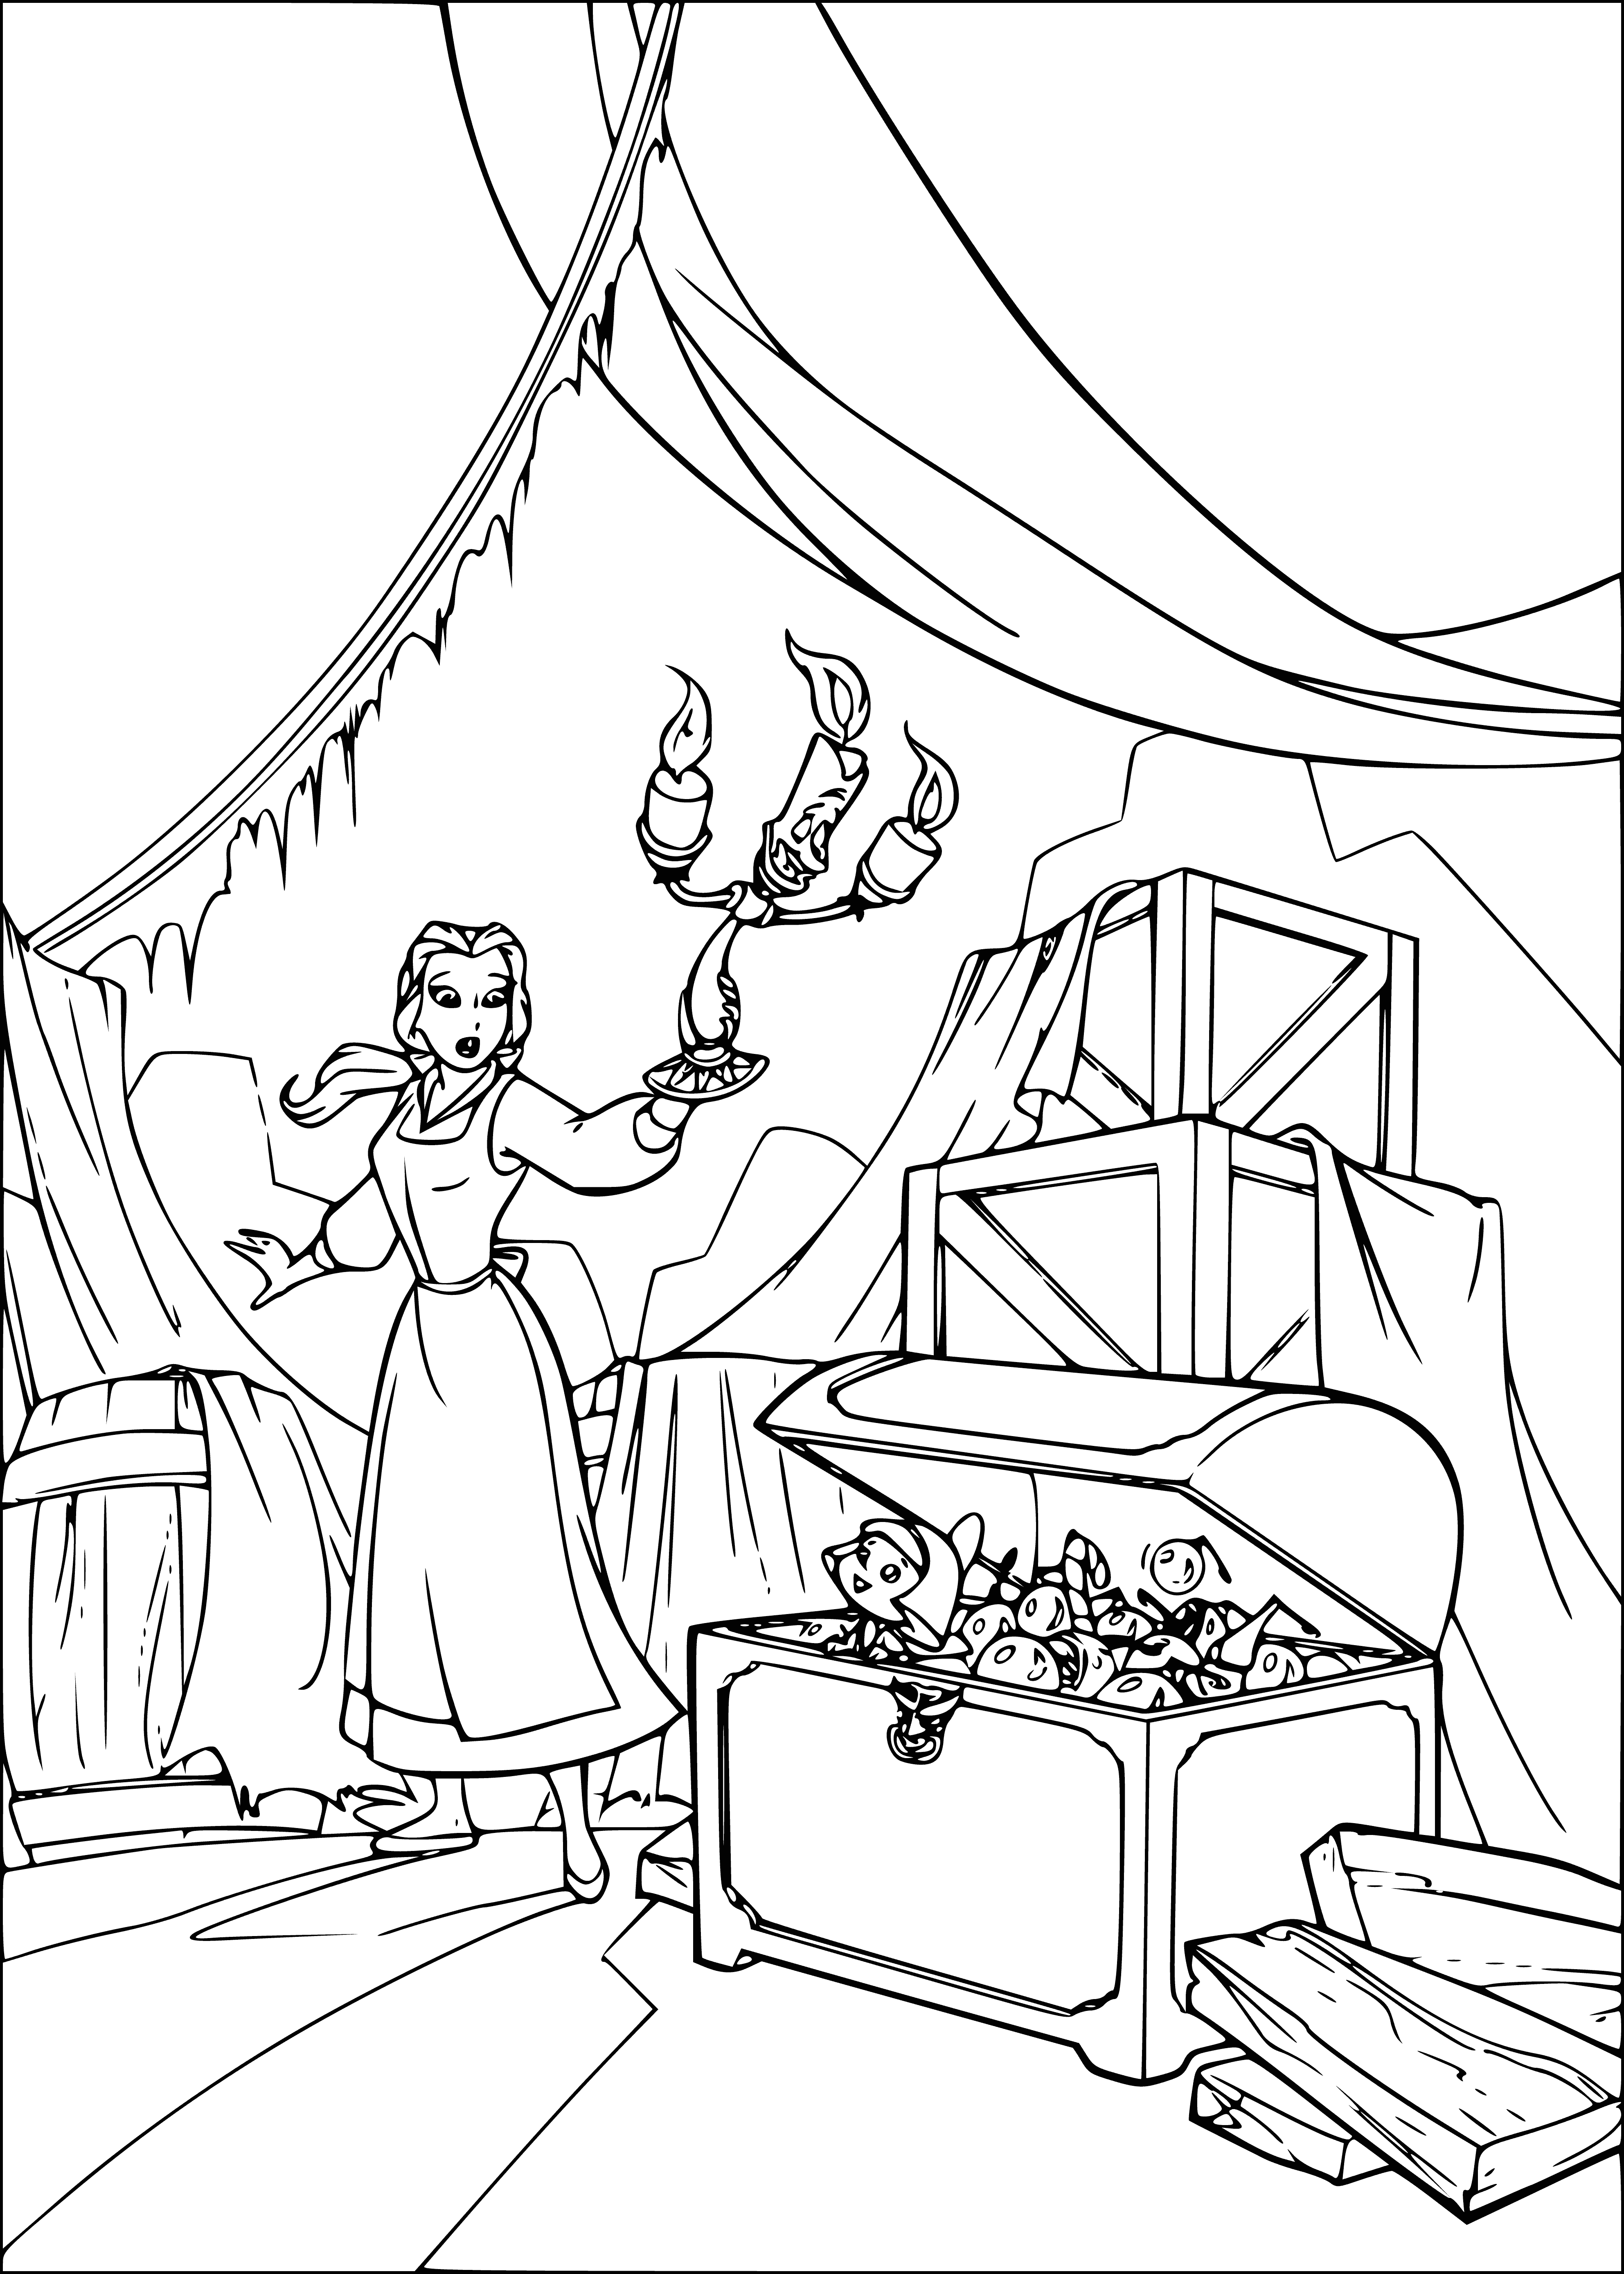 coloring page: => Kids will be delighted by the trove of toys inside the large, wooden toy chest.